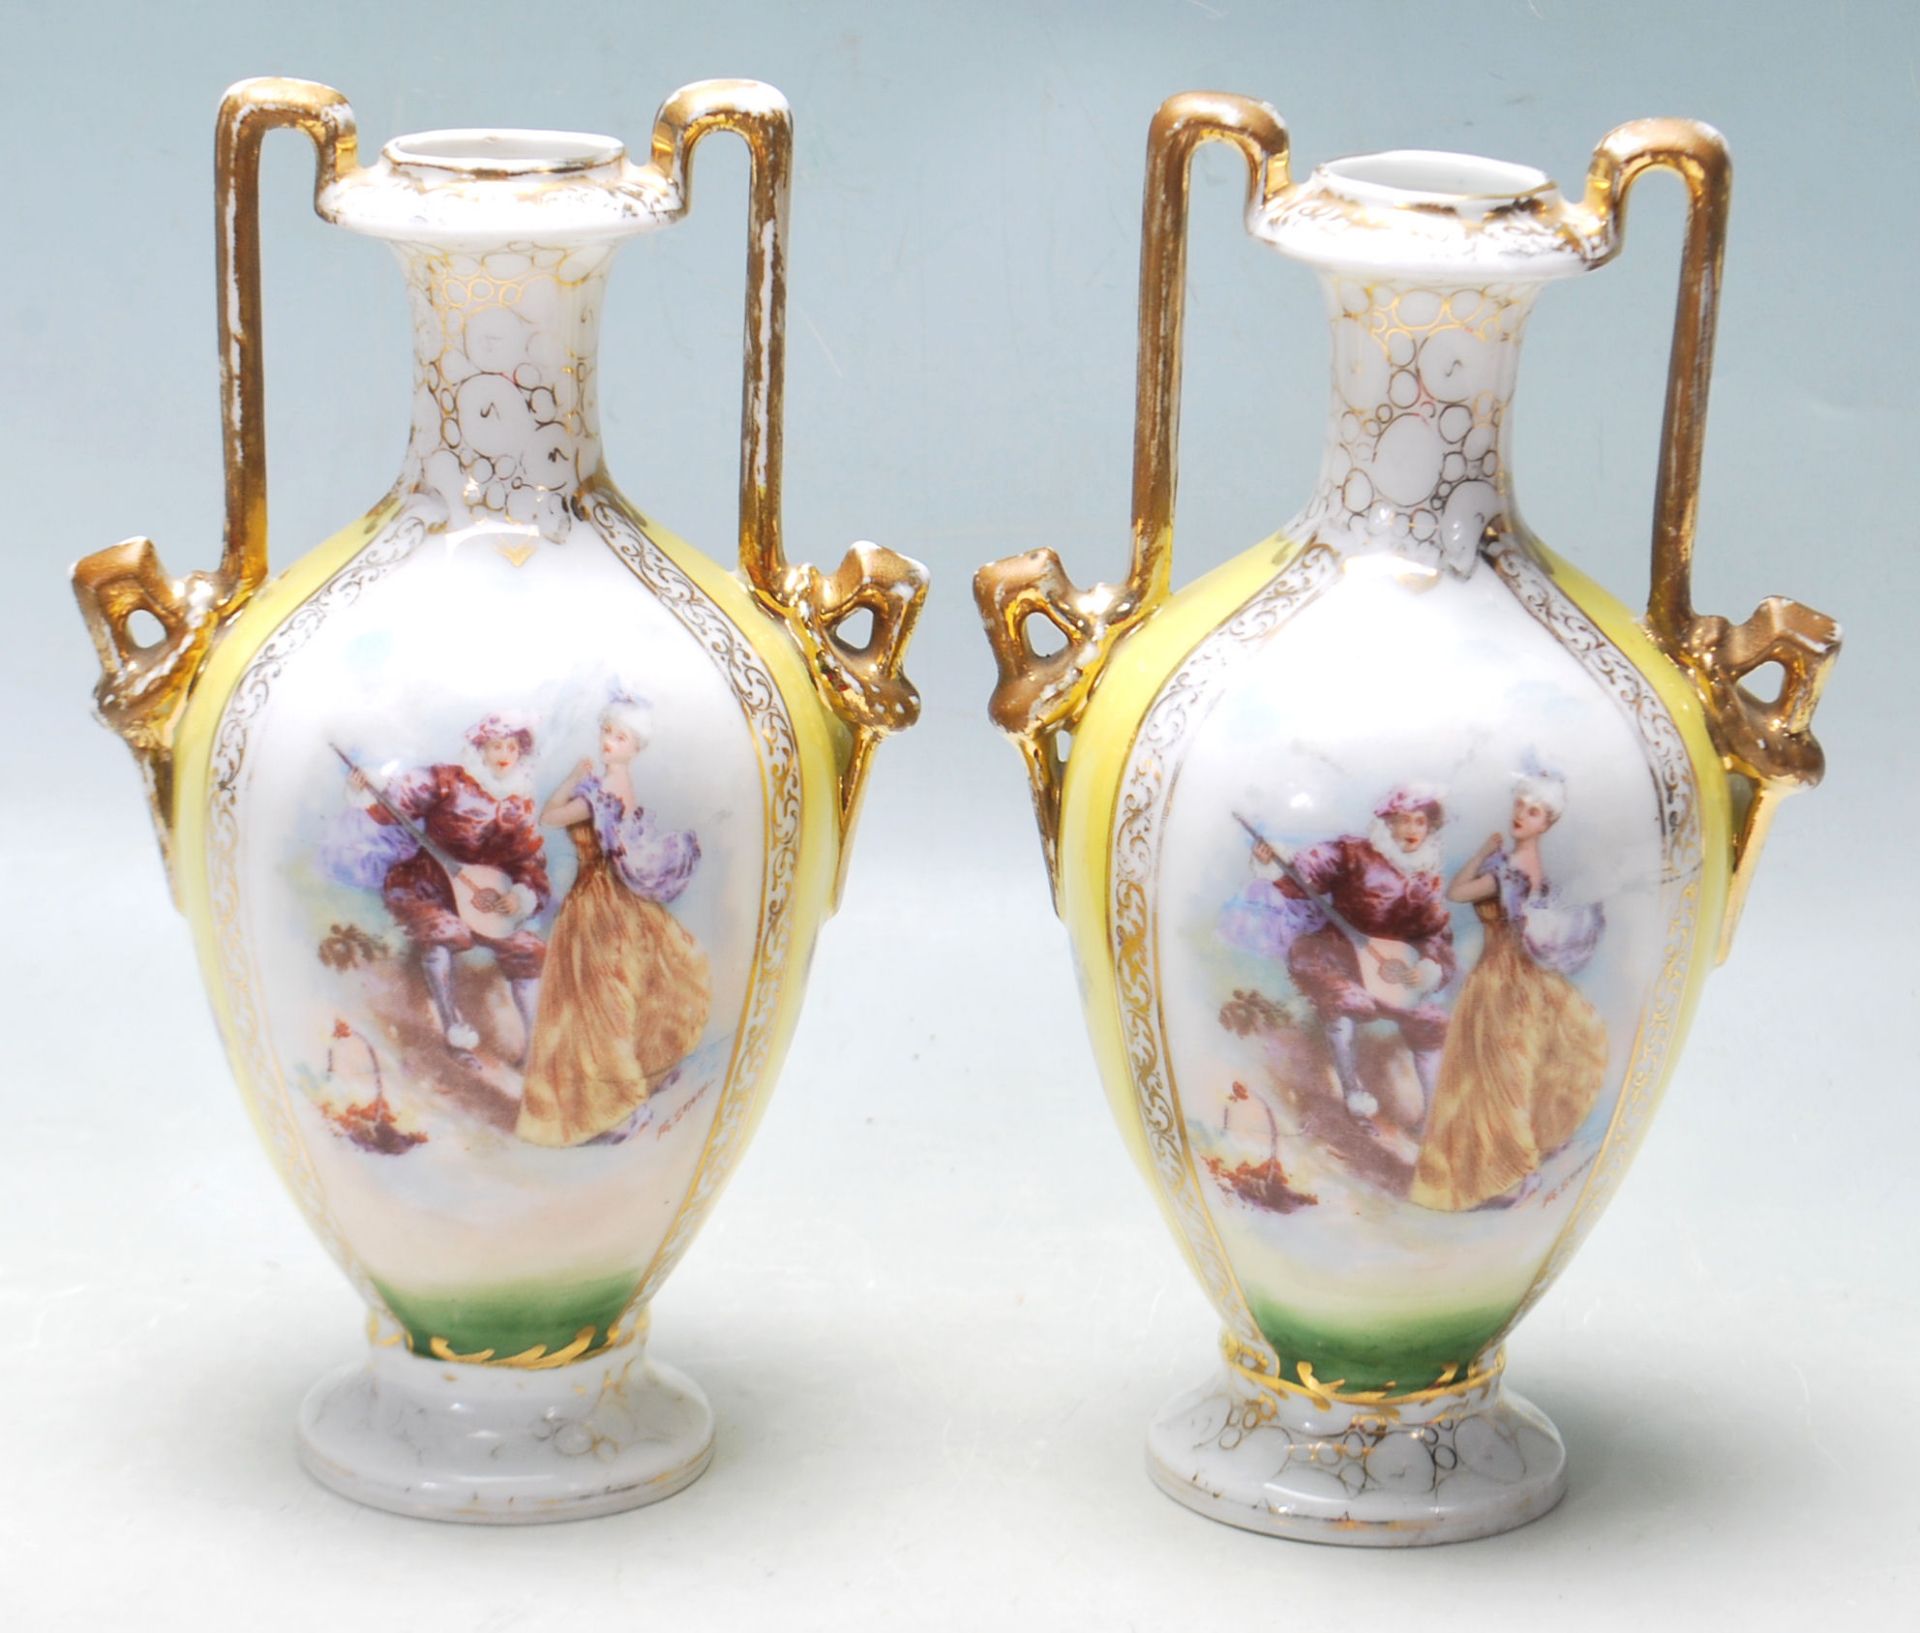 A PAIR OF GERMAN VASES BY VON SCHIERHOLZ 1900C - C.G. SCHIERHOLZ & SON - PAITED BY FR STAHL - Image 5 of 11